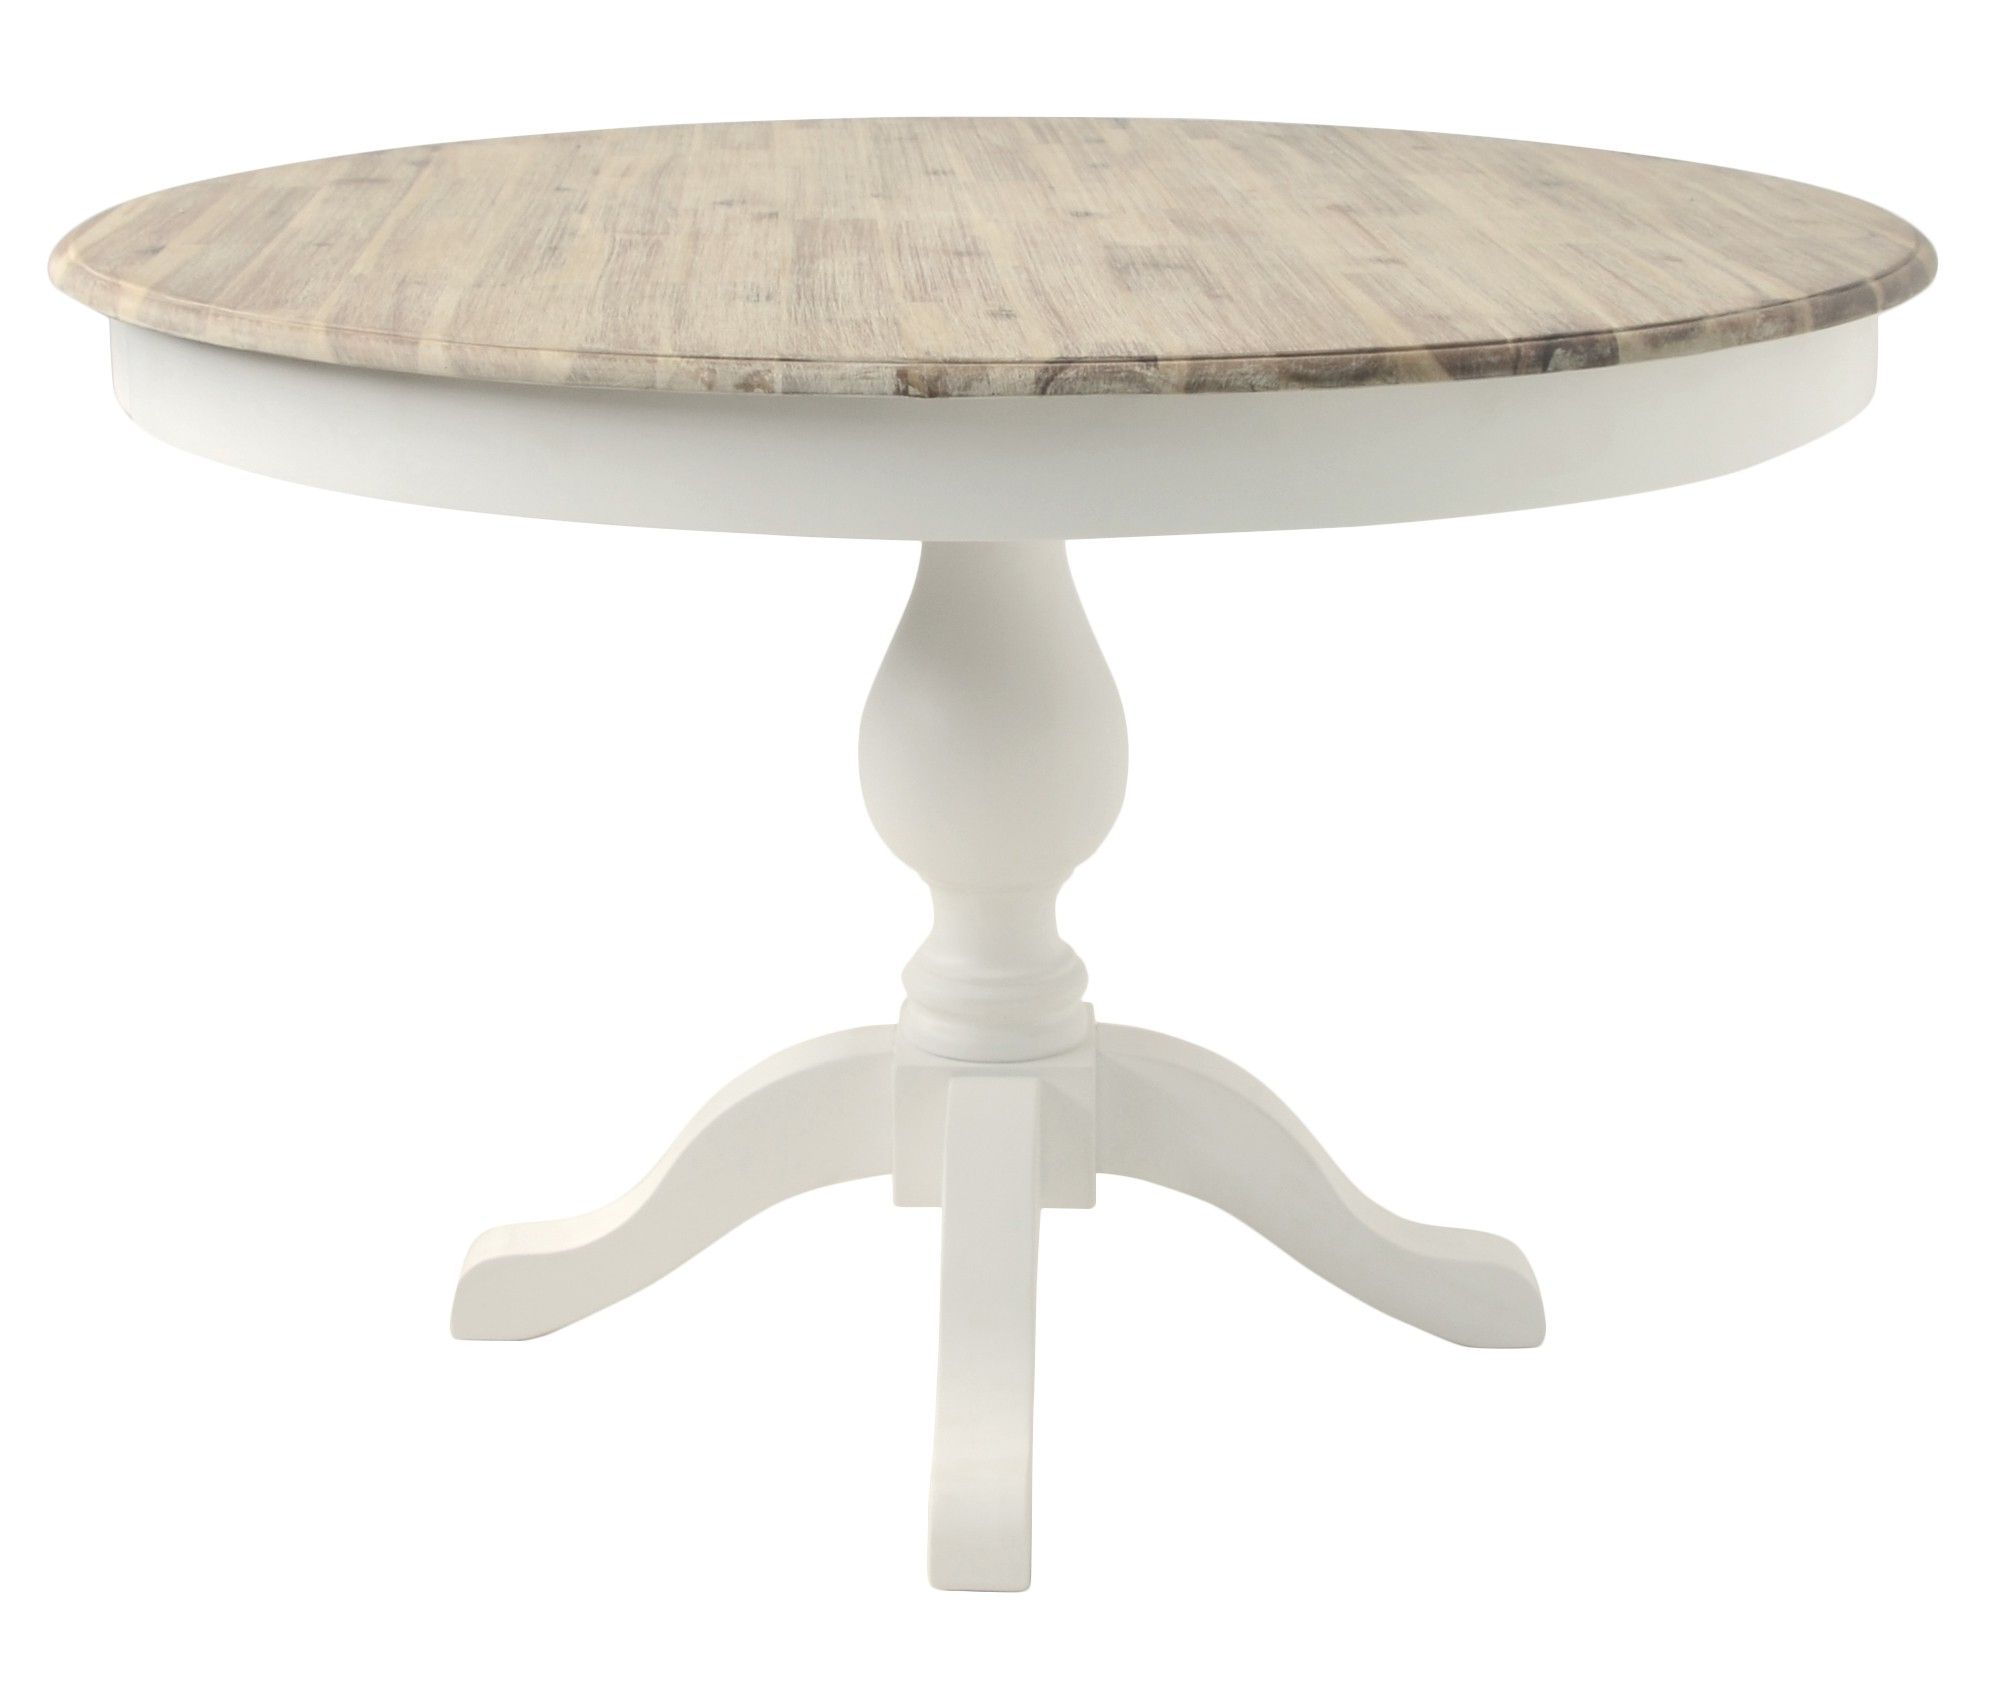 Florence Large Pedestal Round Dining Table (120Cm) – White In Well Known Cheap Round Dining Tables (View 23 of 25)